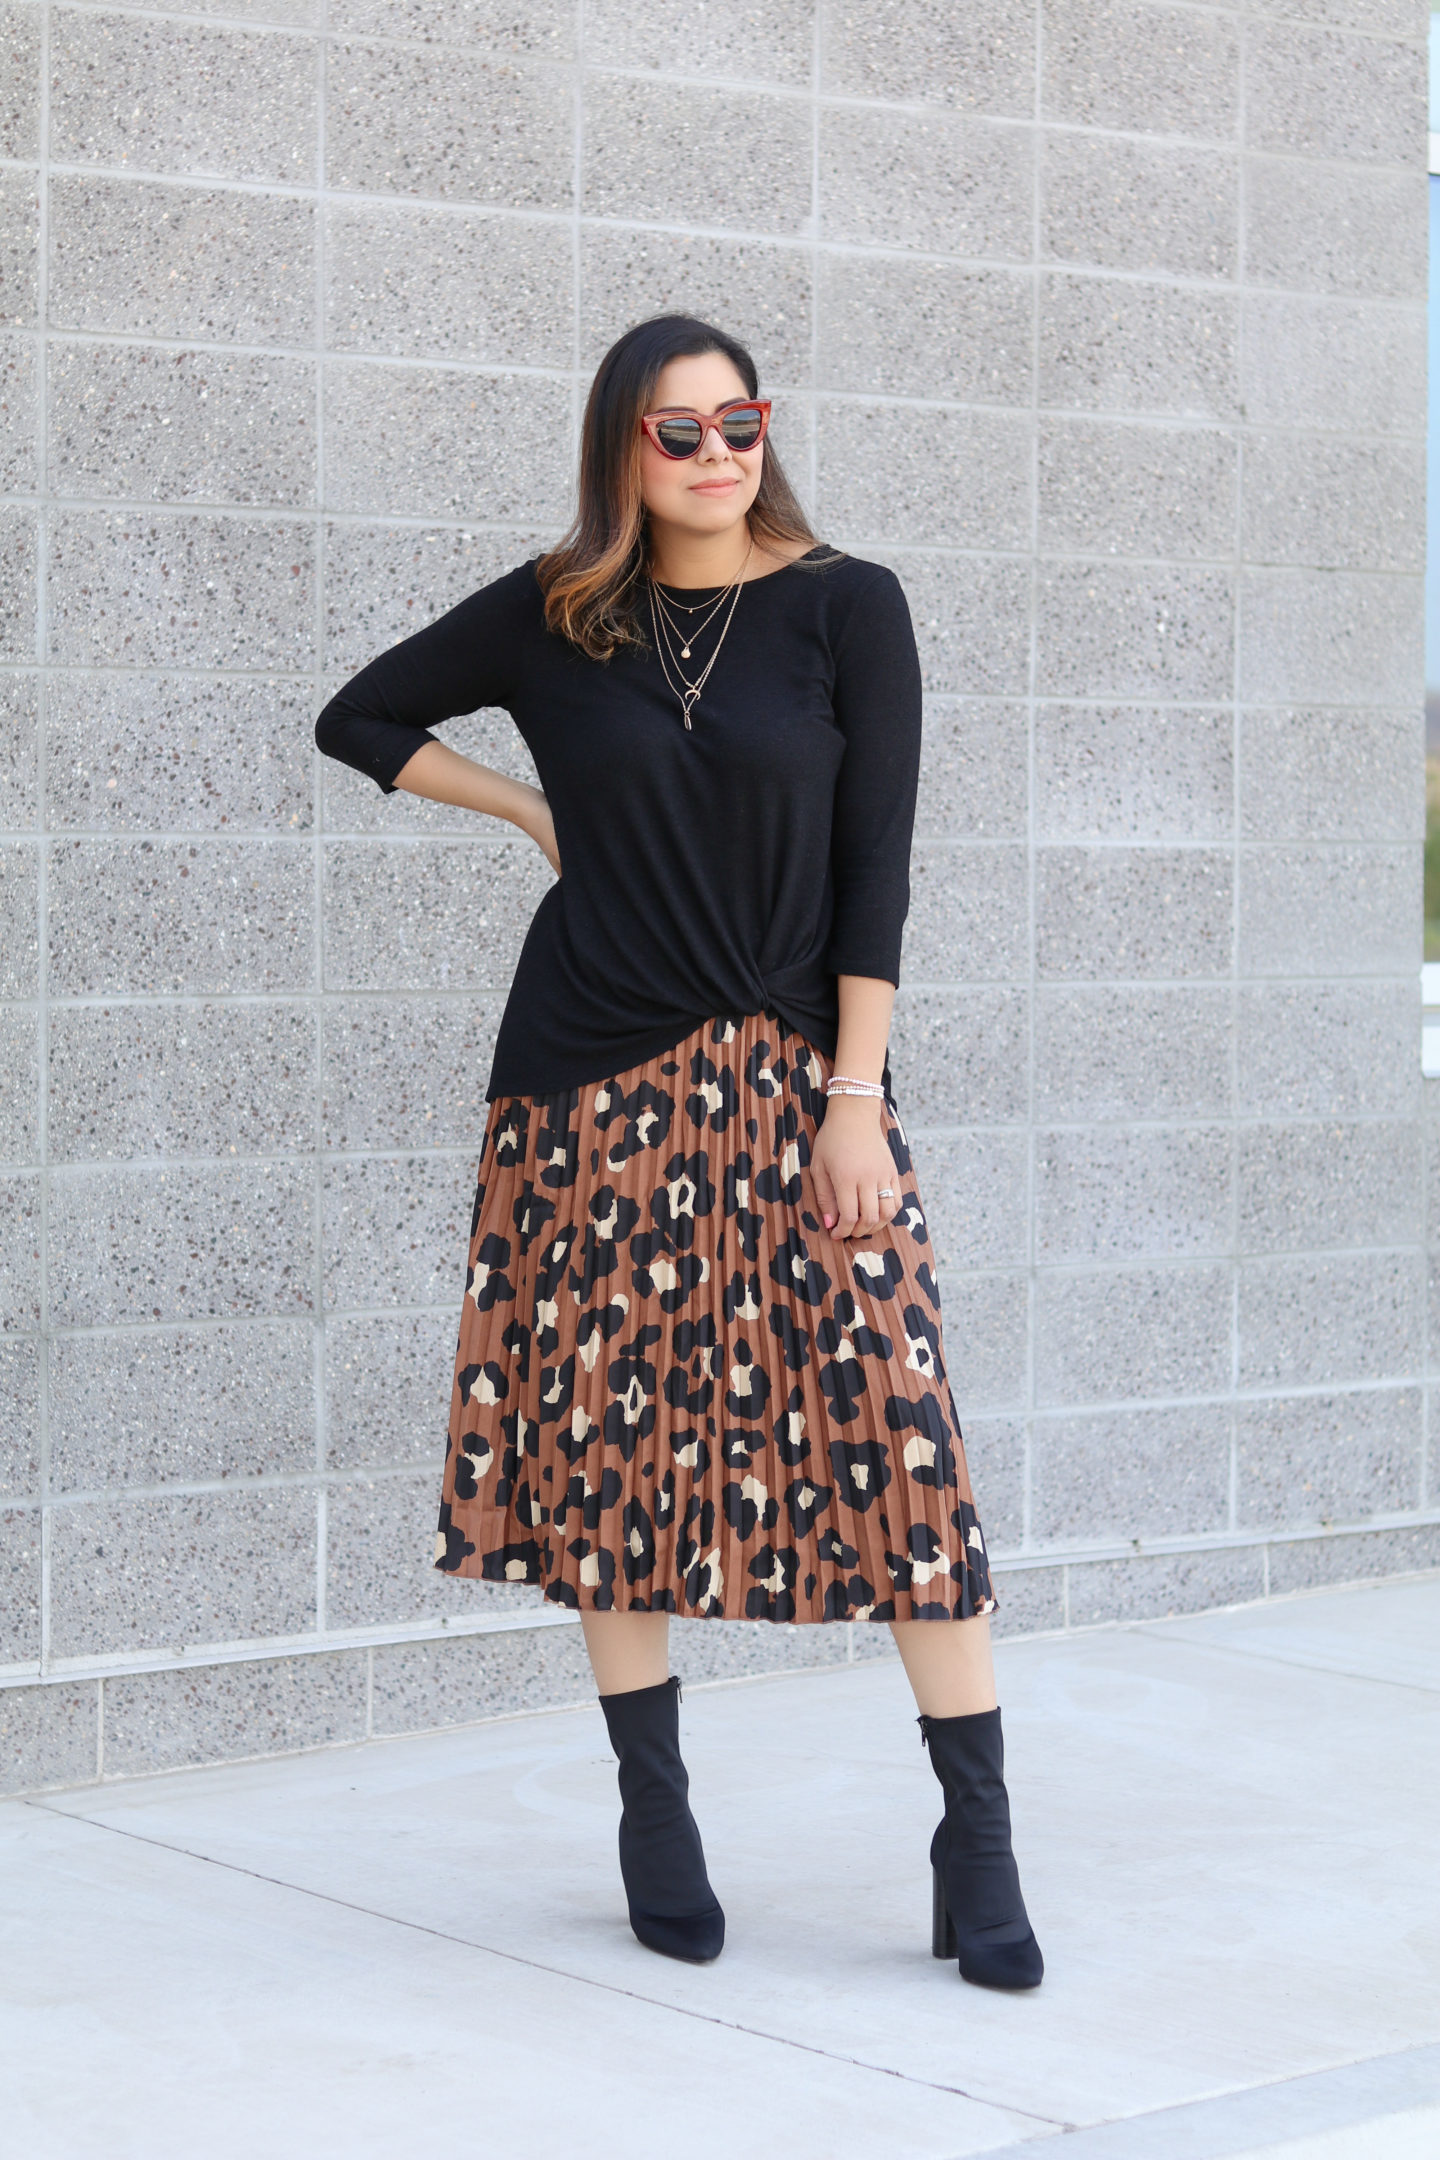 Chic Thanksgiving Outfit Idea, Stylish Thanksgiving Outfit Idea